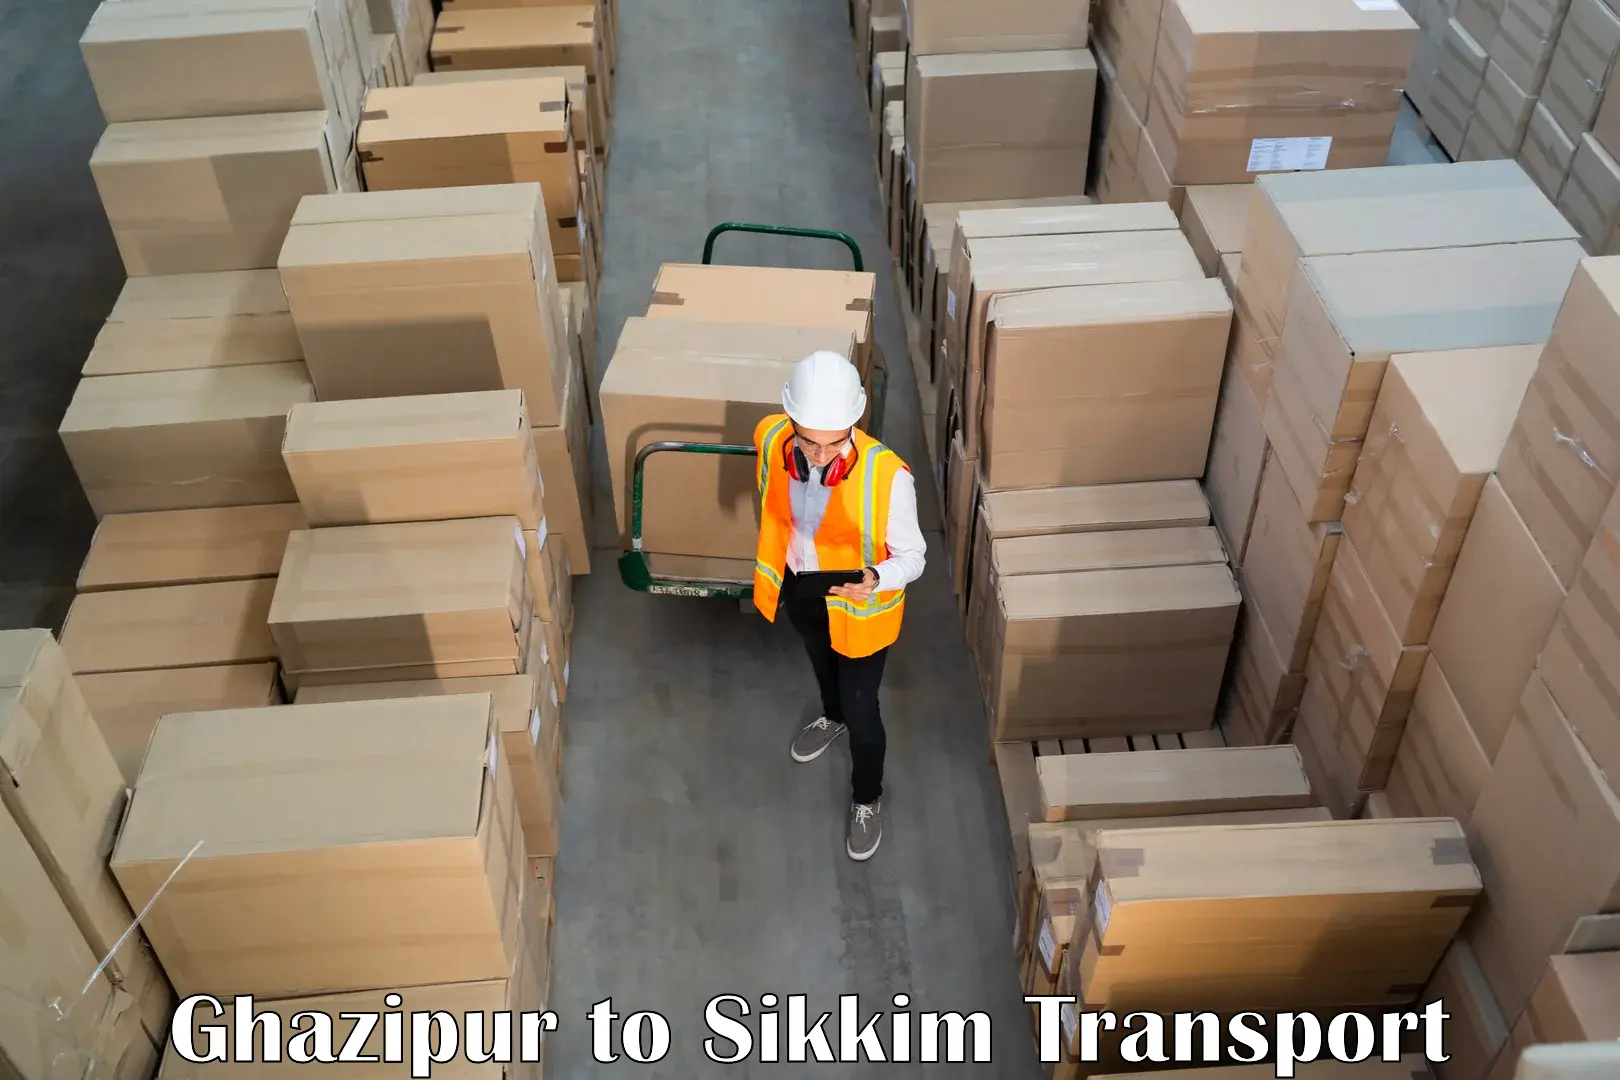 Lorry transport service Ghazipur to Pelling